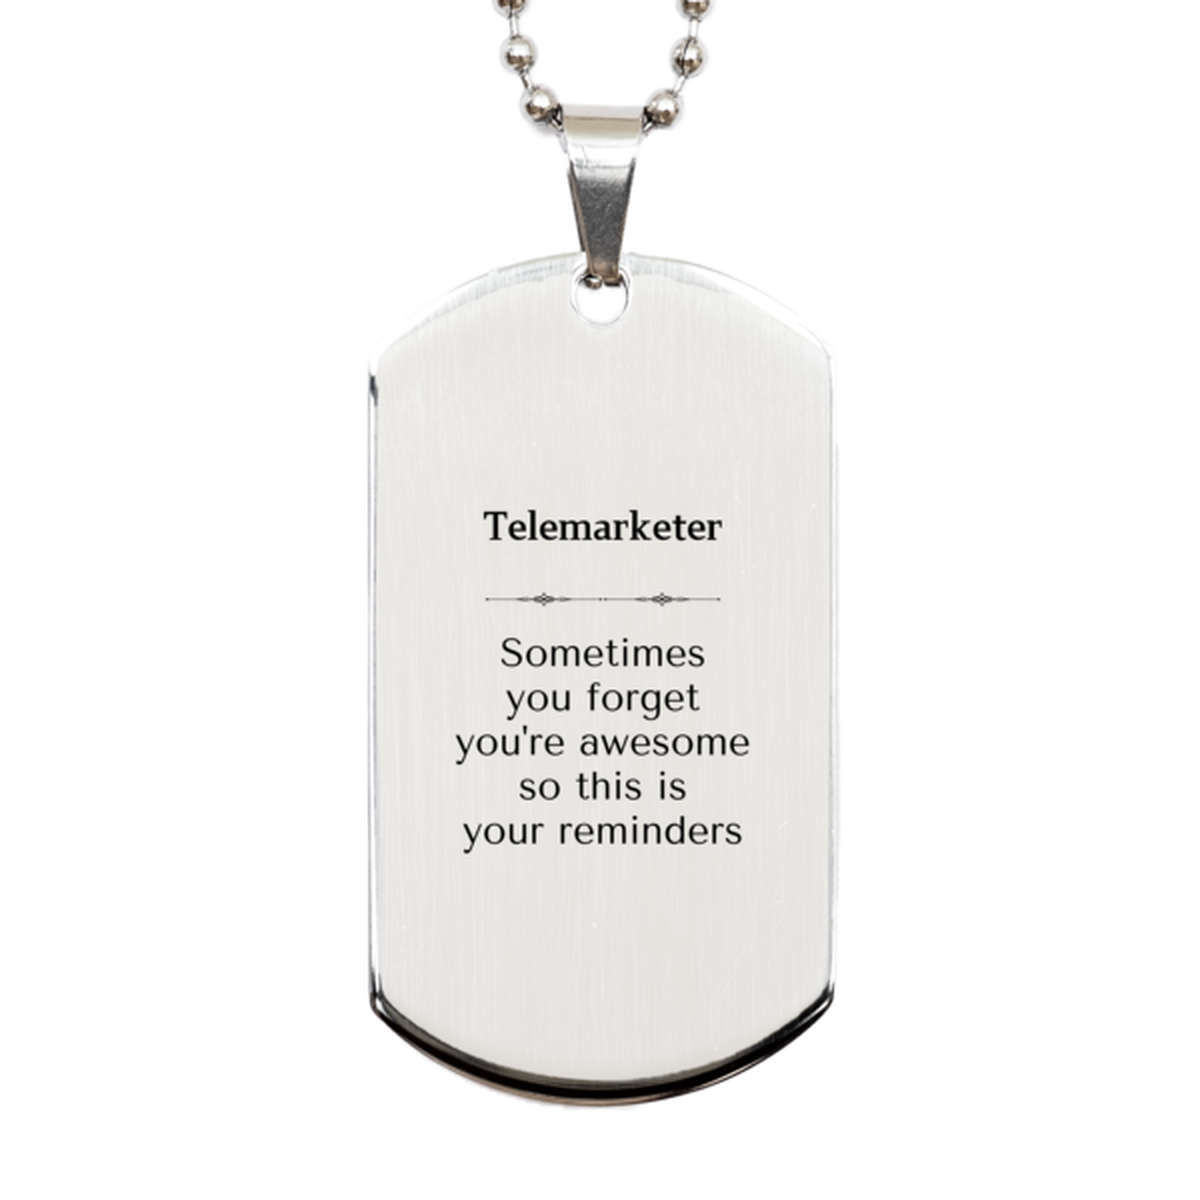 Sentimental Telemarketer Silver Dog Tag, Telemarketer Sometimes you forget you're awesome so this is your reminders, Graduation Christmas Birthday Gifts for Telemarketer, Men, Women, Coworkers